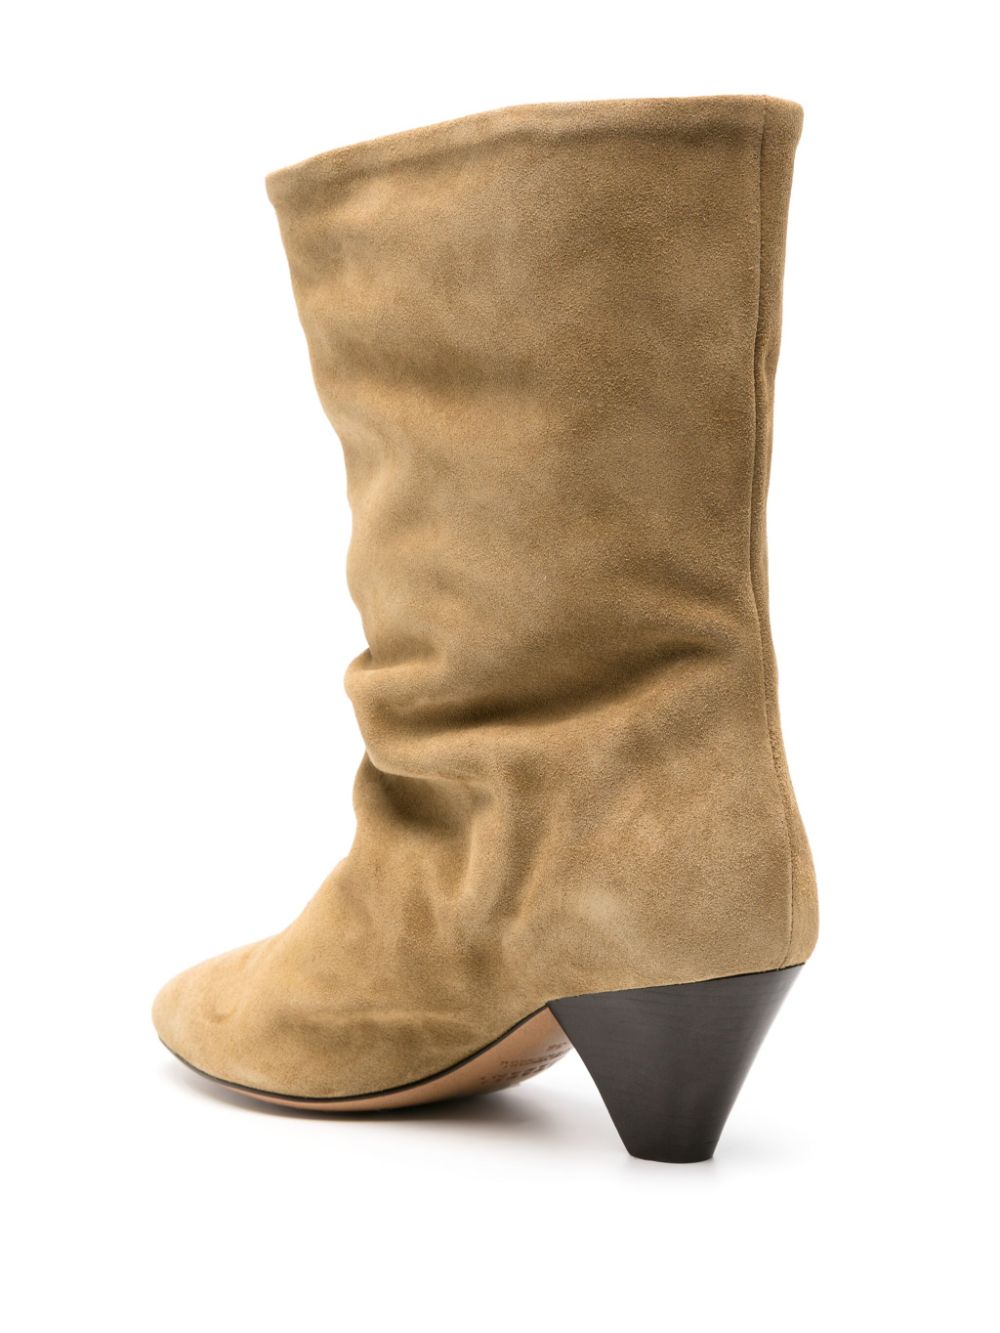 ISABEL MARANT Slouch-style Gray Suede Boots for Women with Calf Leather Lining and Stacked Heel